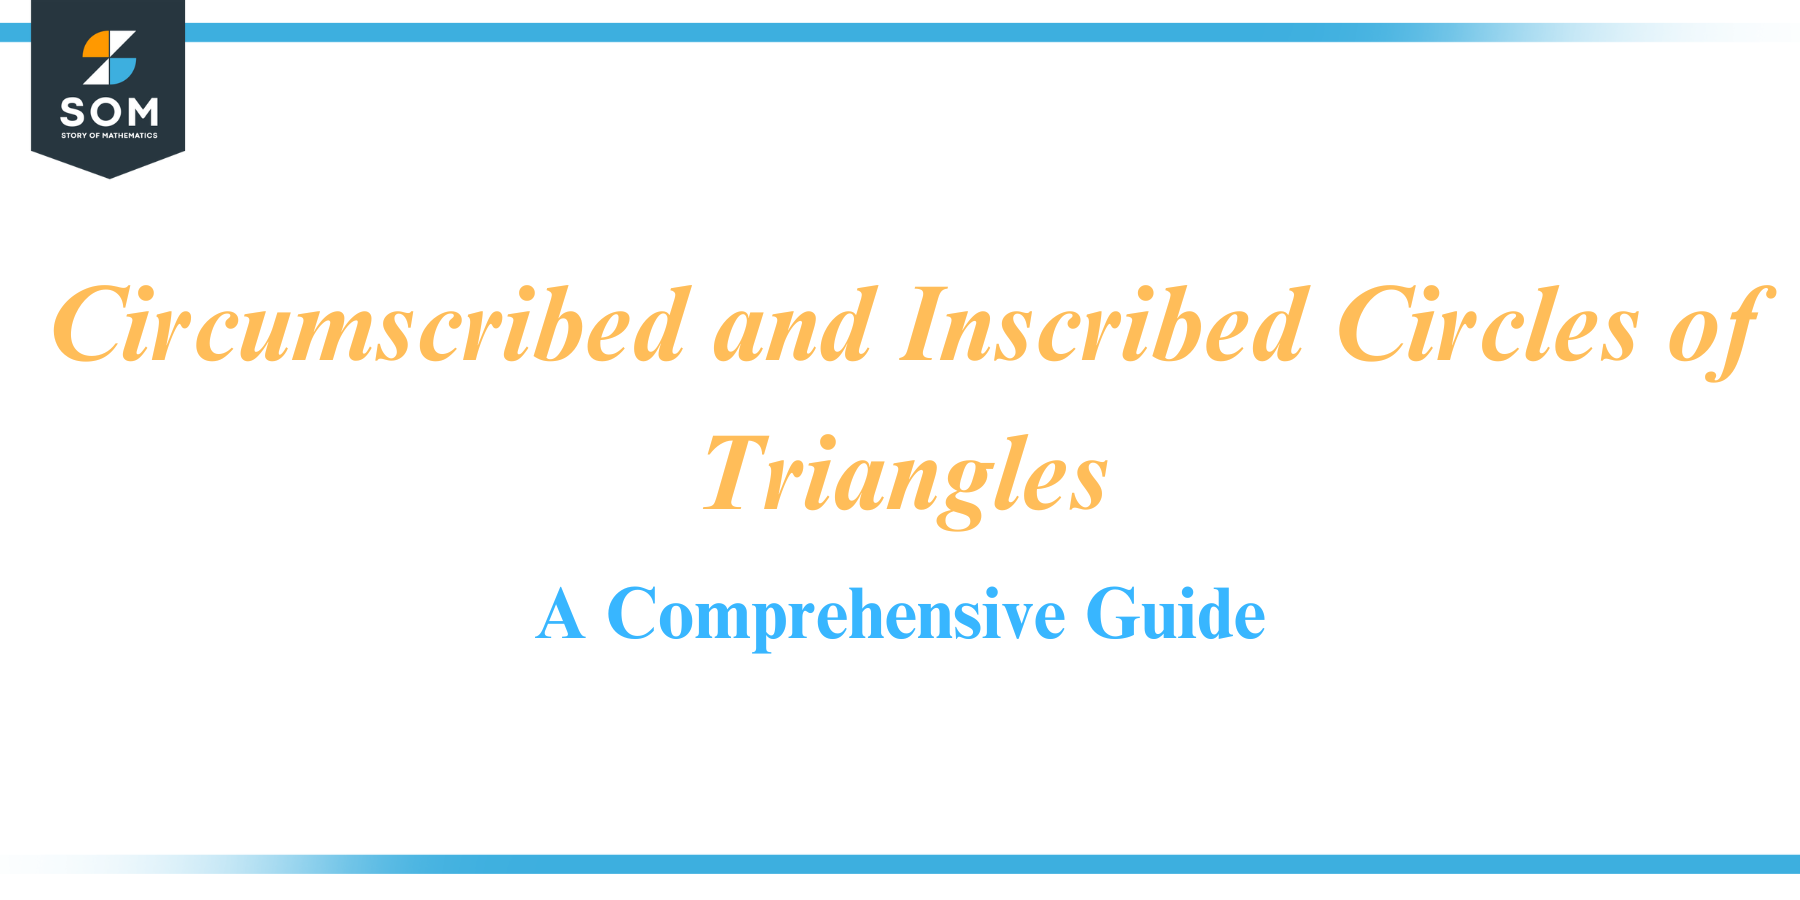 Circumscribed and Inscribed Circles of Triangles A Comprehensive Guide